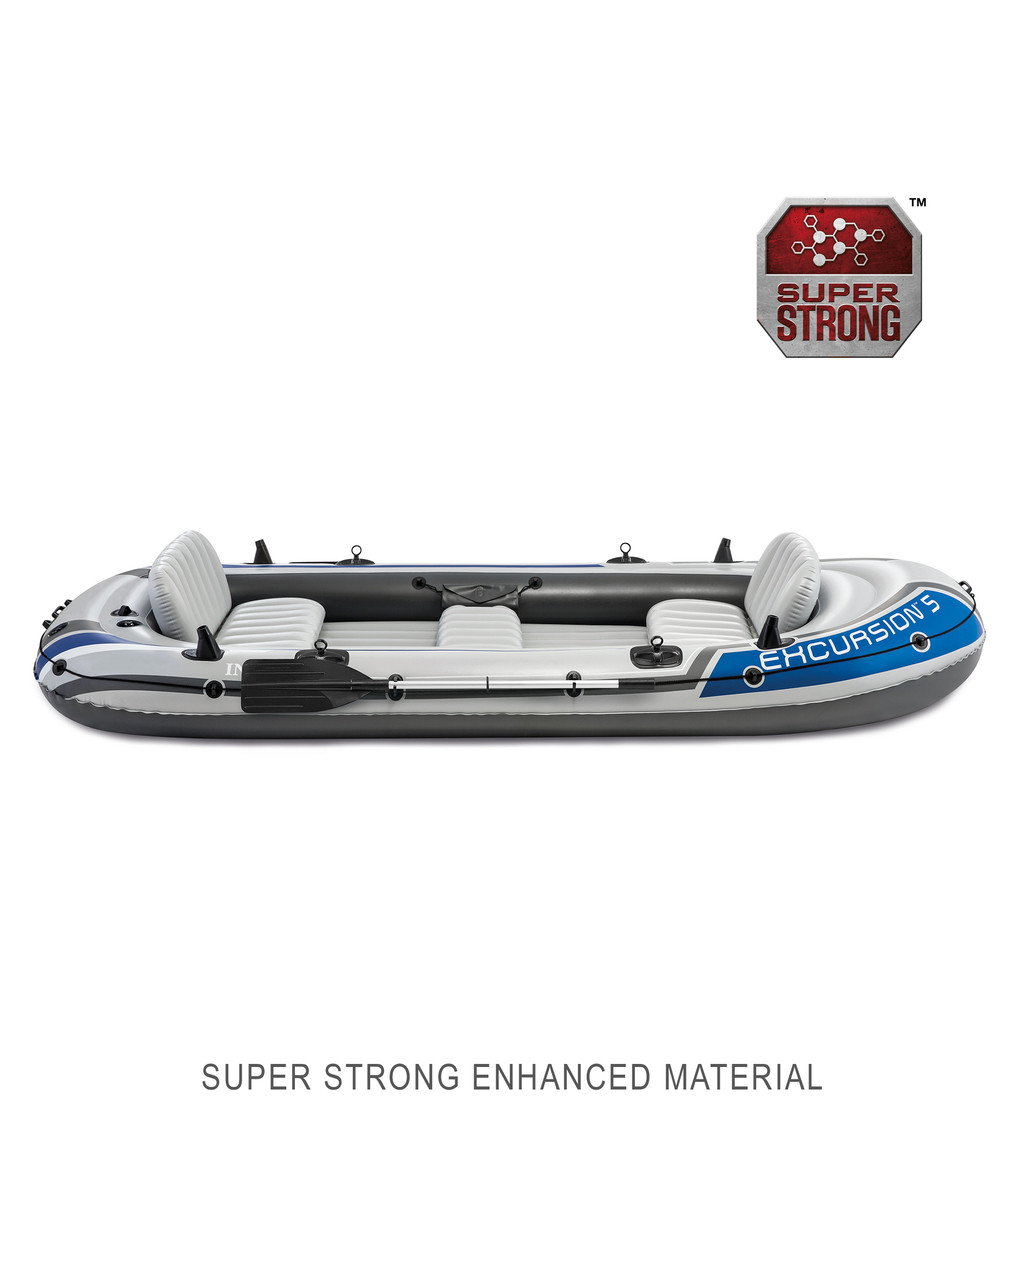 INTEX Excursion™ 5 Inflatable Boat Set - 5 Person